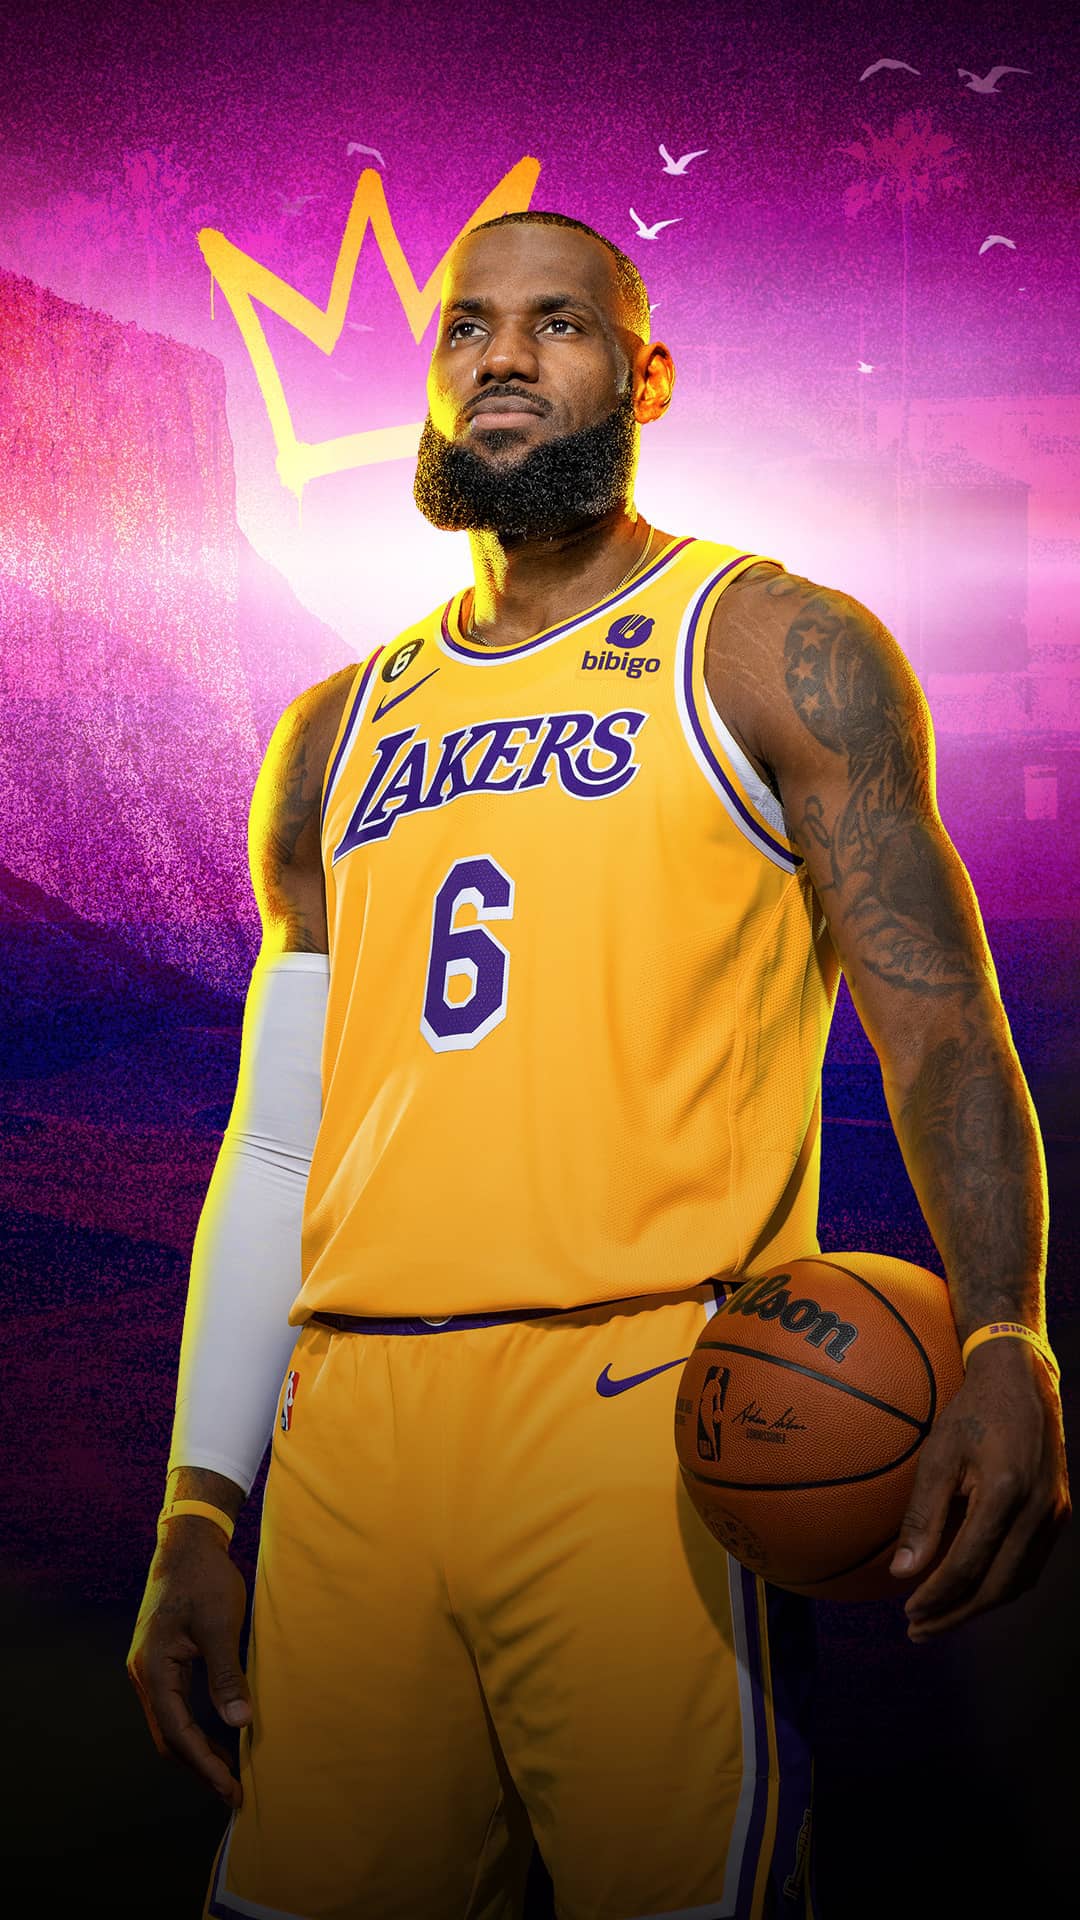 Mobile wallpaper Sports Basketball Nba Los Angeles Lakers Lebron James  1160882 download the picture for free